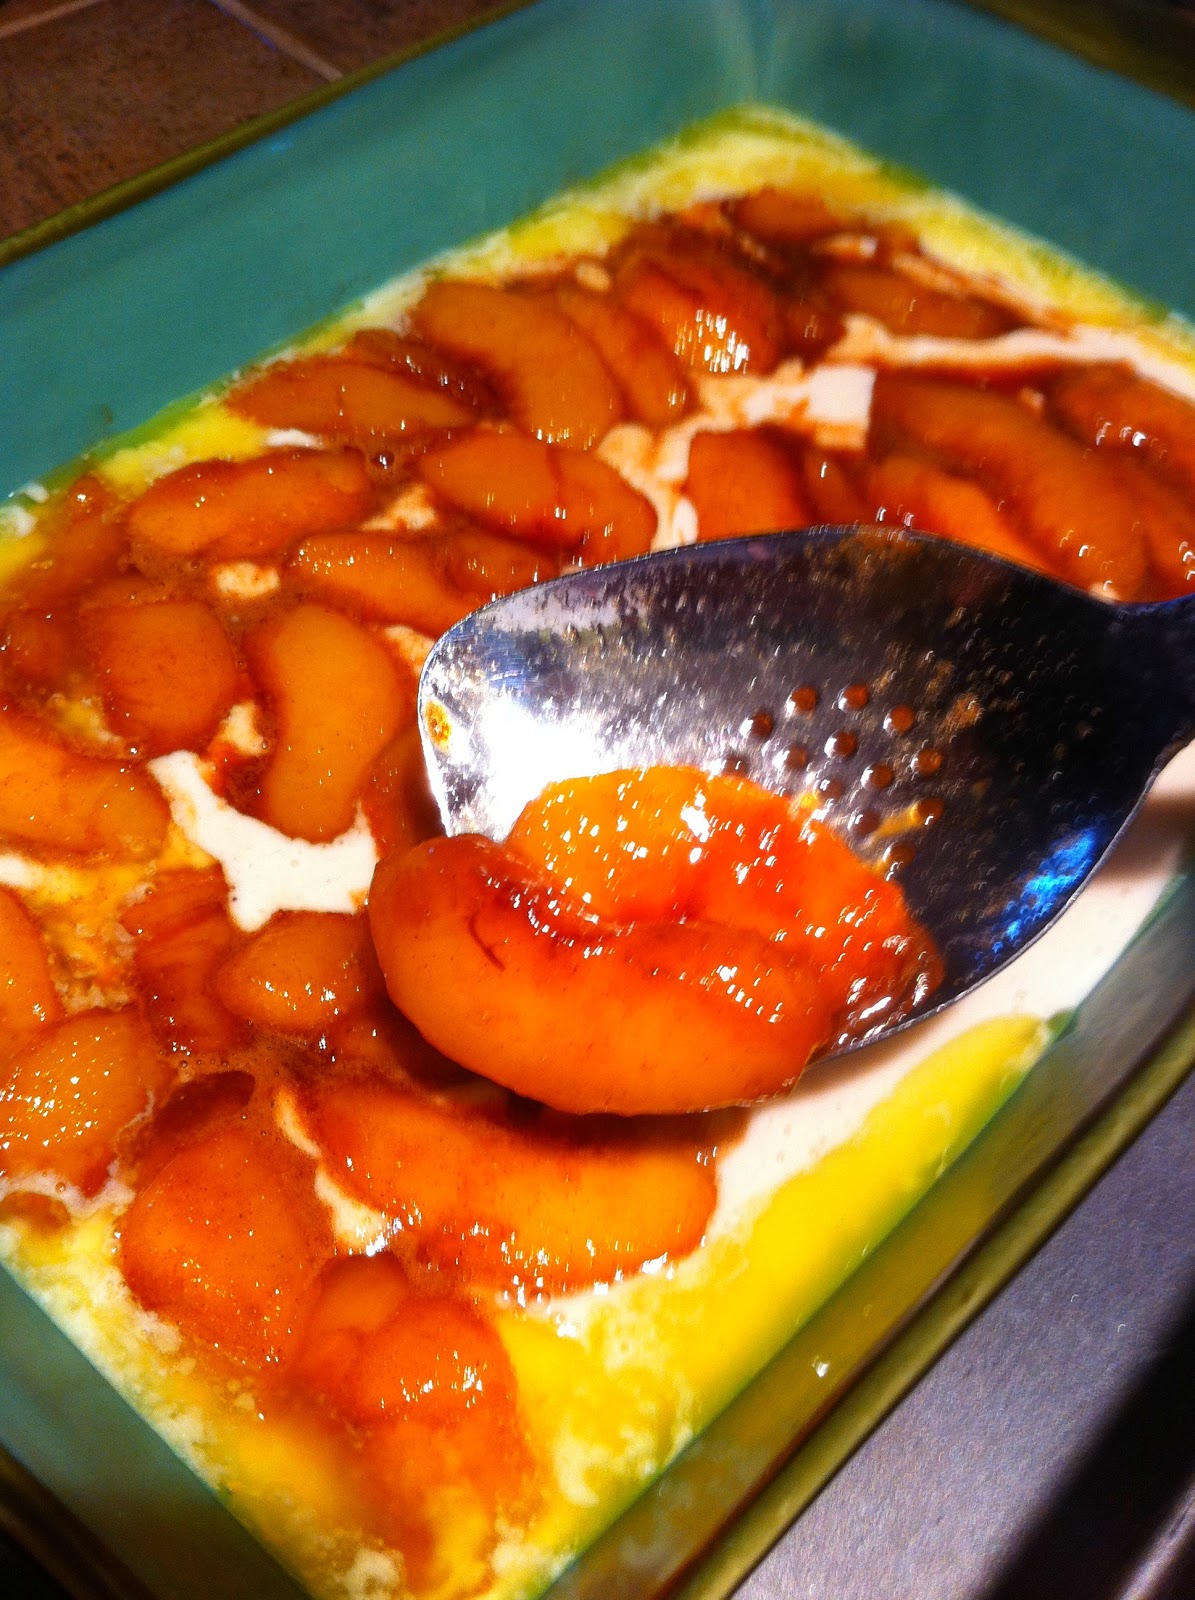 Cooking The Amazing: PEACH COBBLER